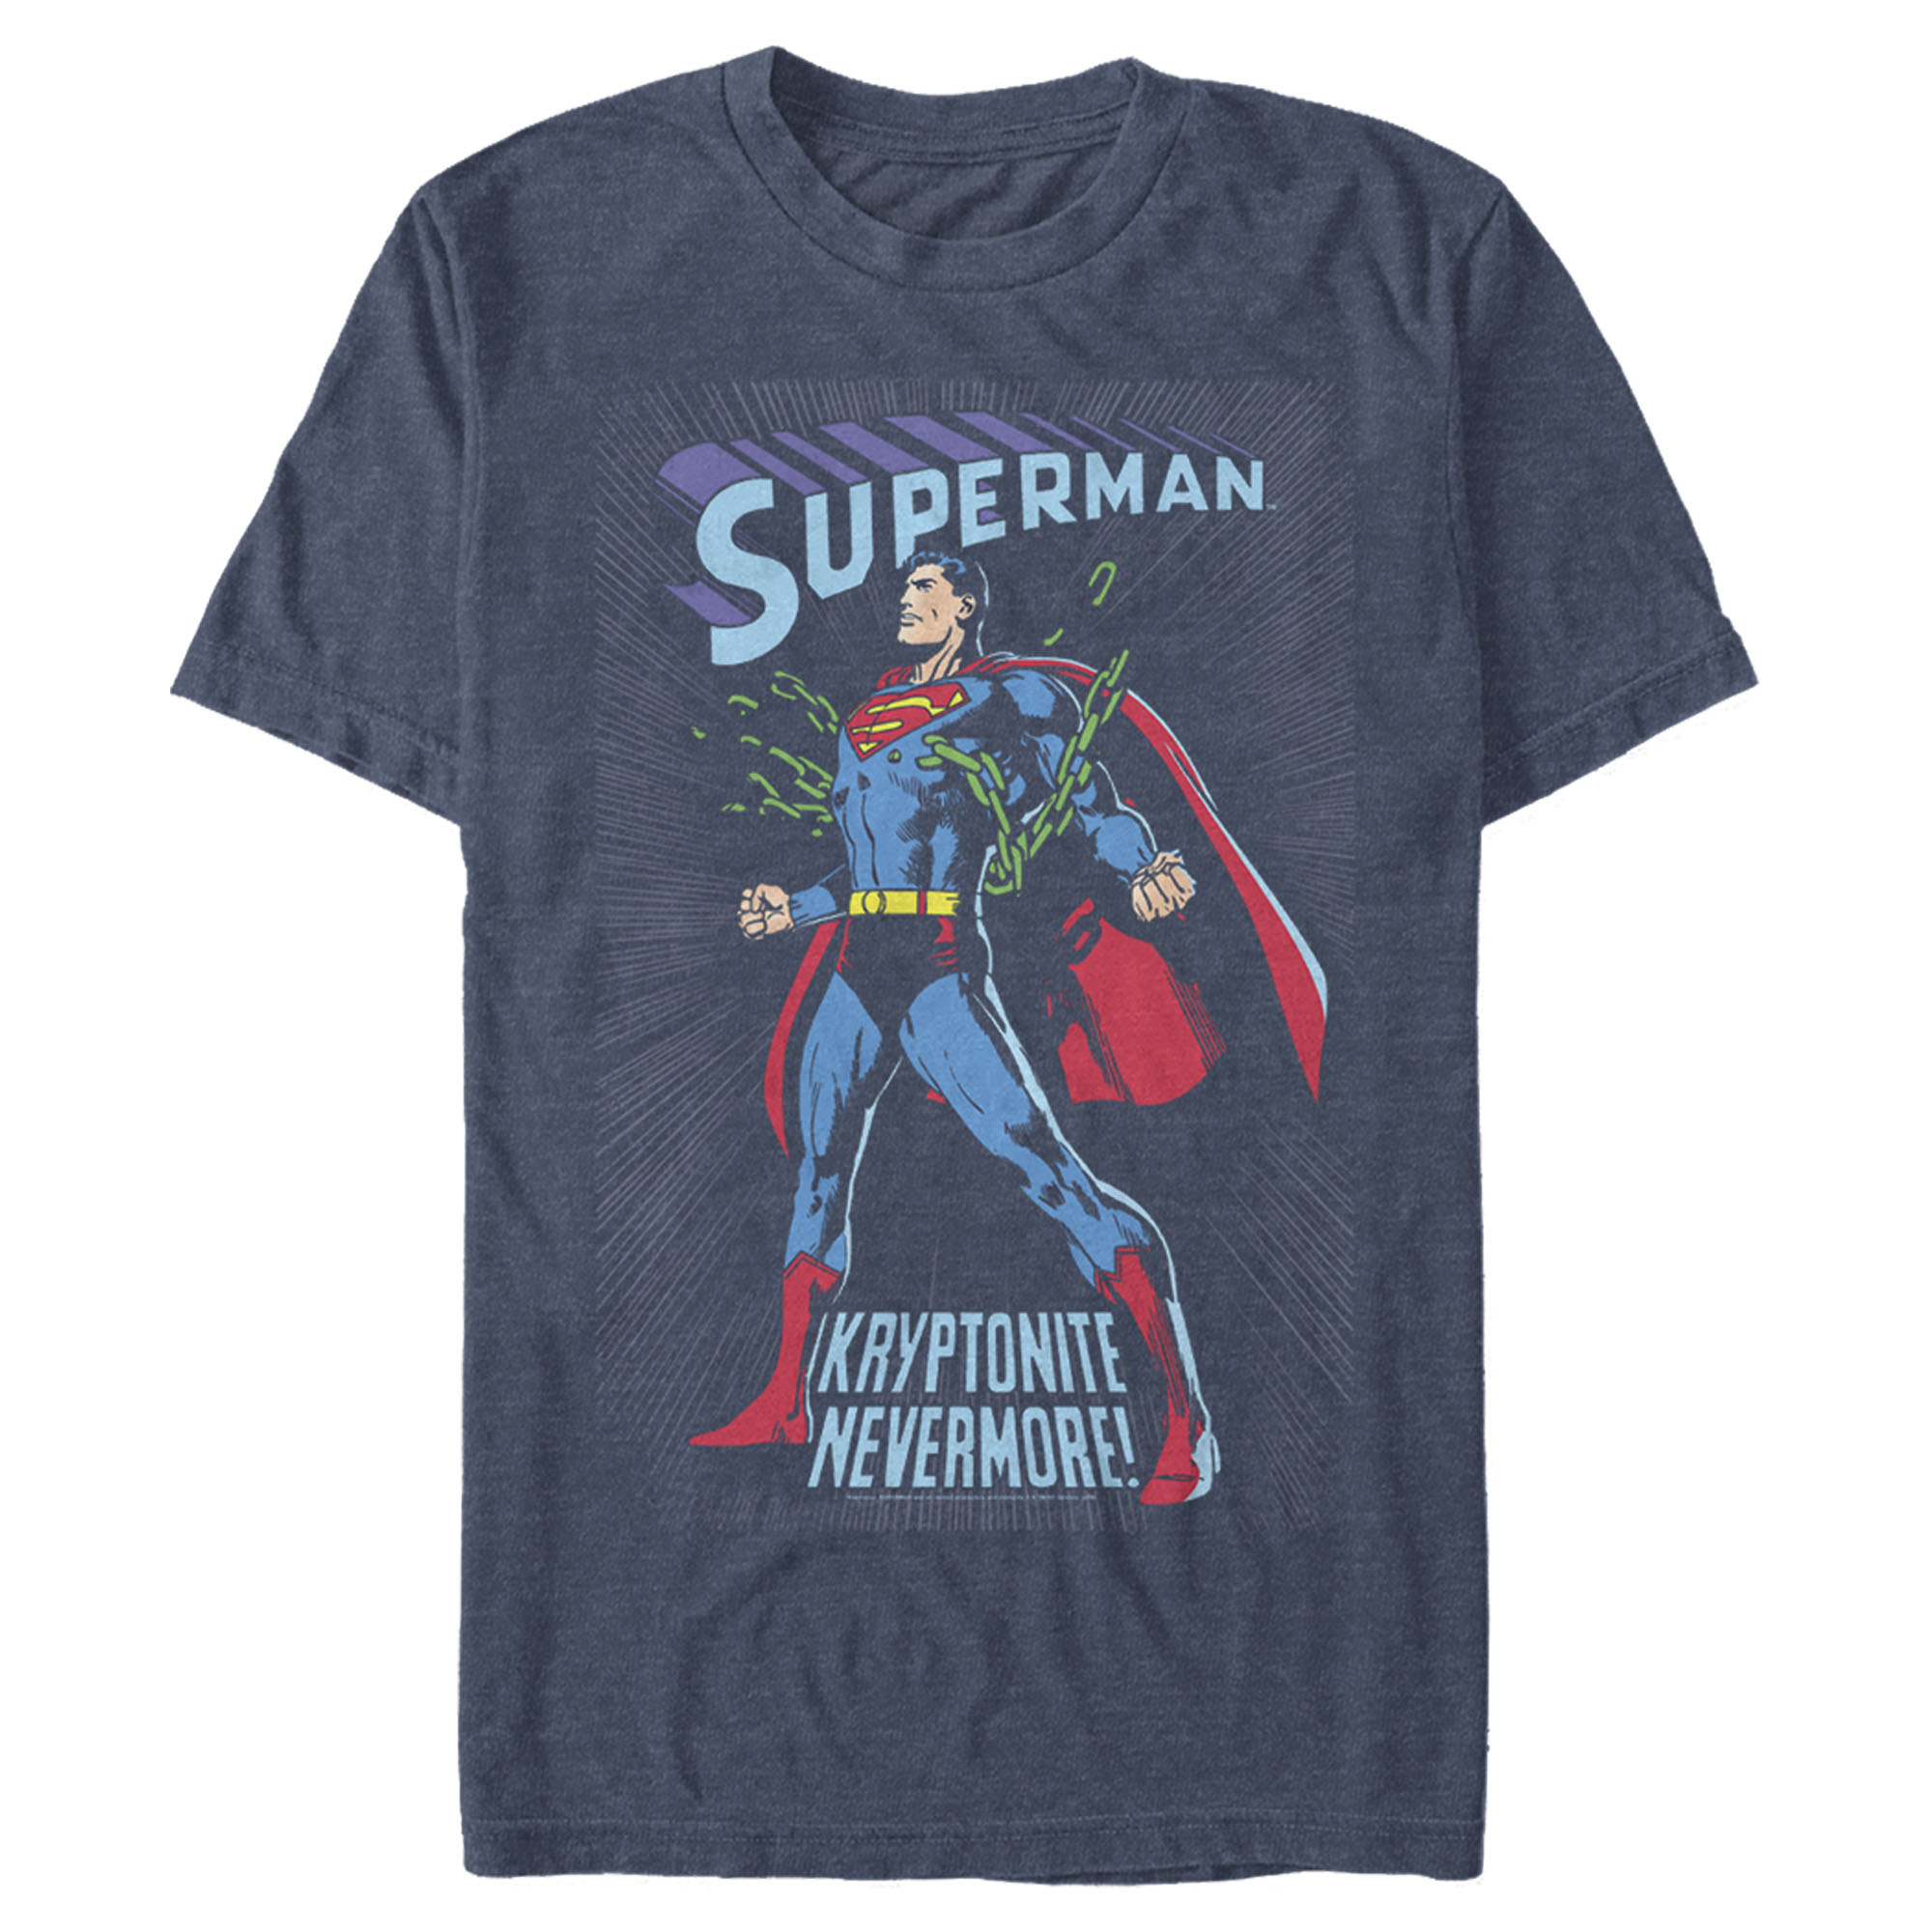 Men's Superman Kryptonite Nevermore Cover  Graphic Tee Navy Blue Heather 3X Large - image 1 of 3